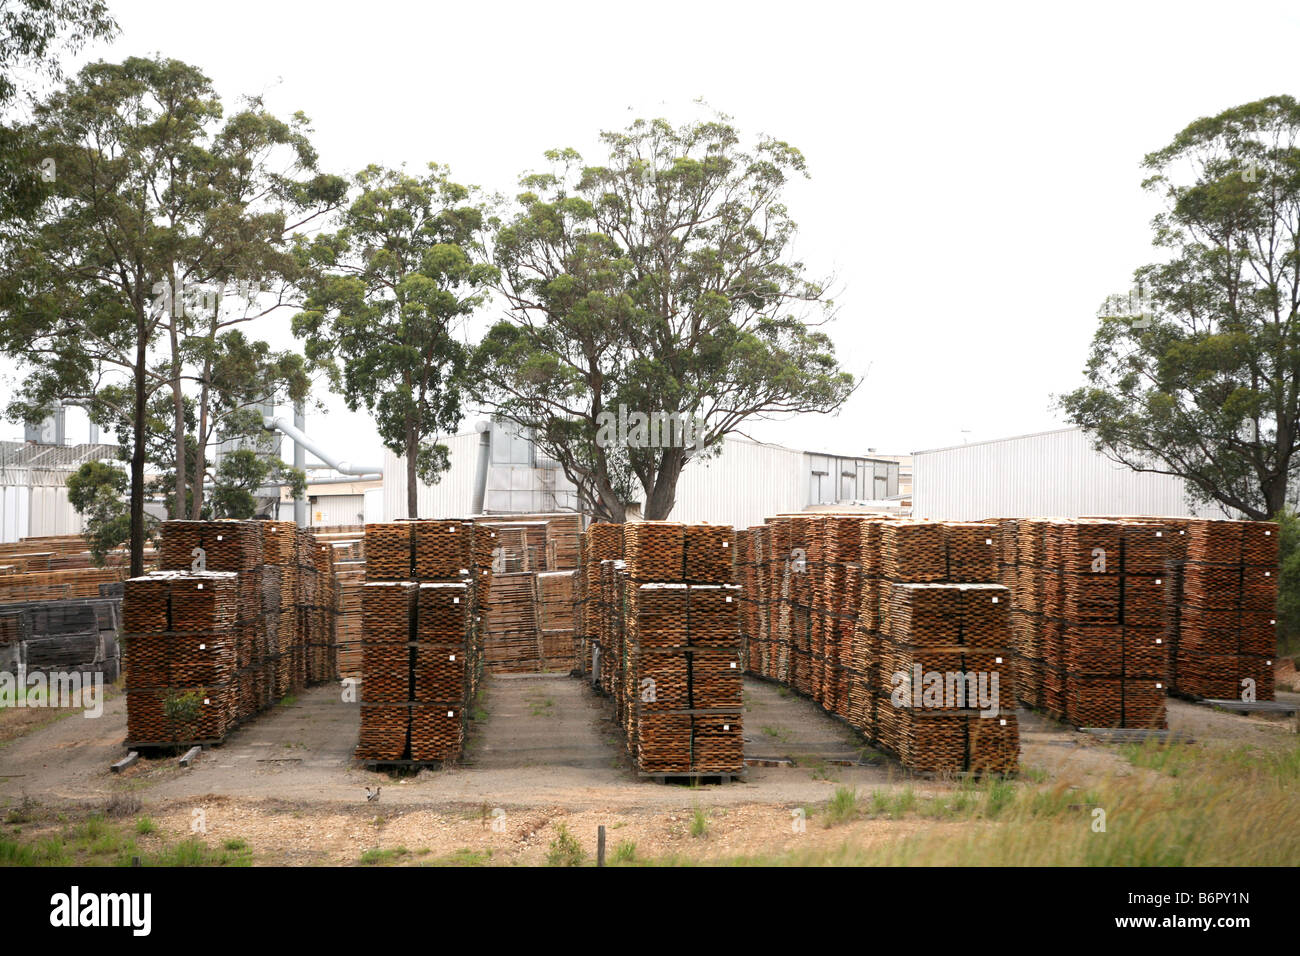 Australian hardwood stacked and drying at a yard in NSW Australia Stock Photo